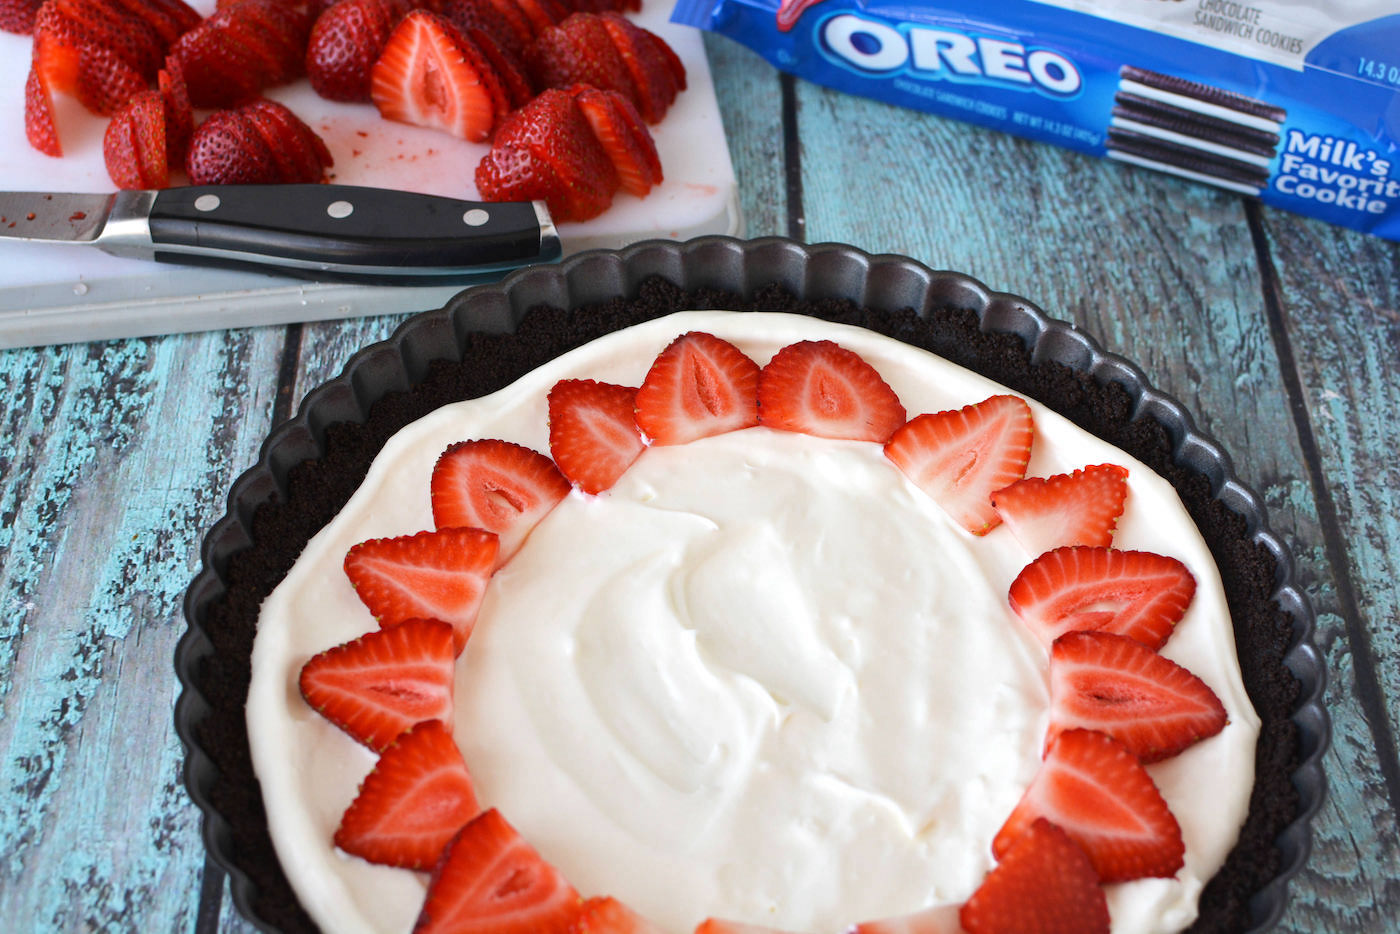 Lining the strawberries on top of the Oreo tart